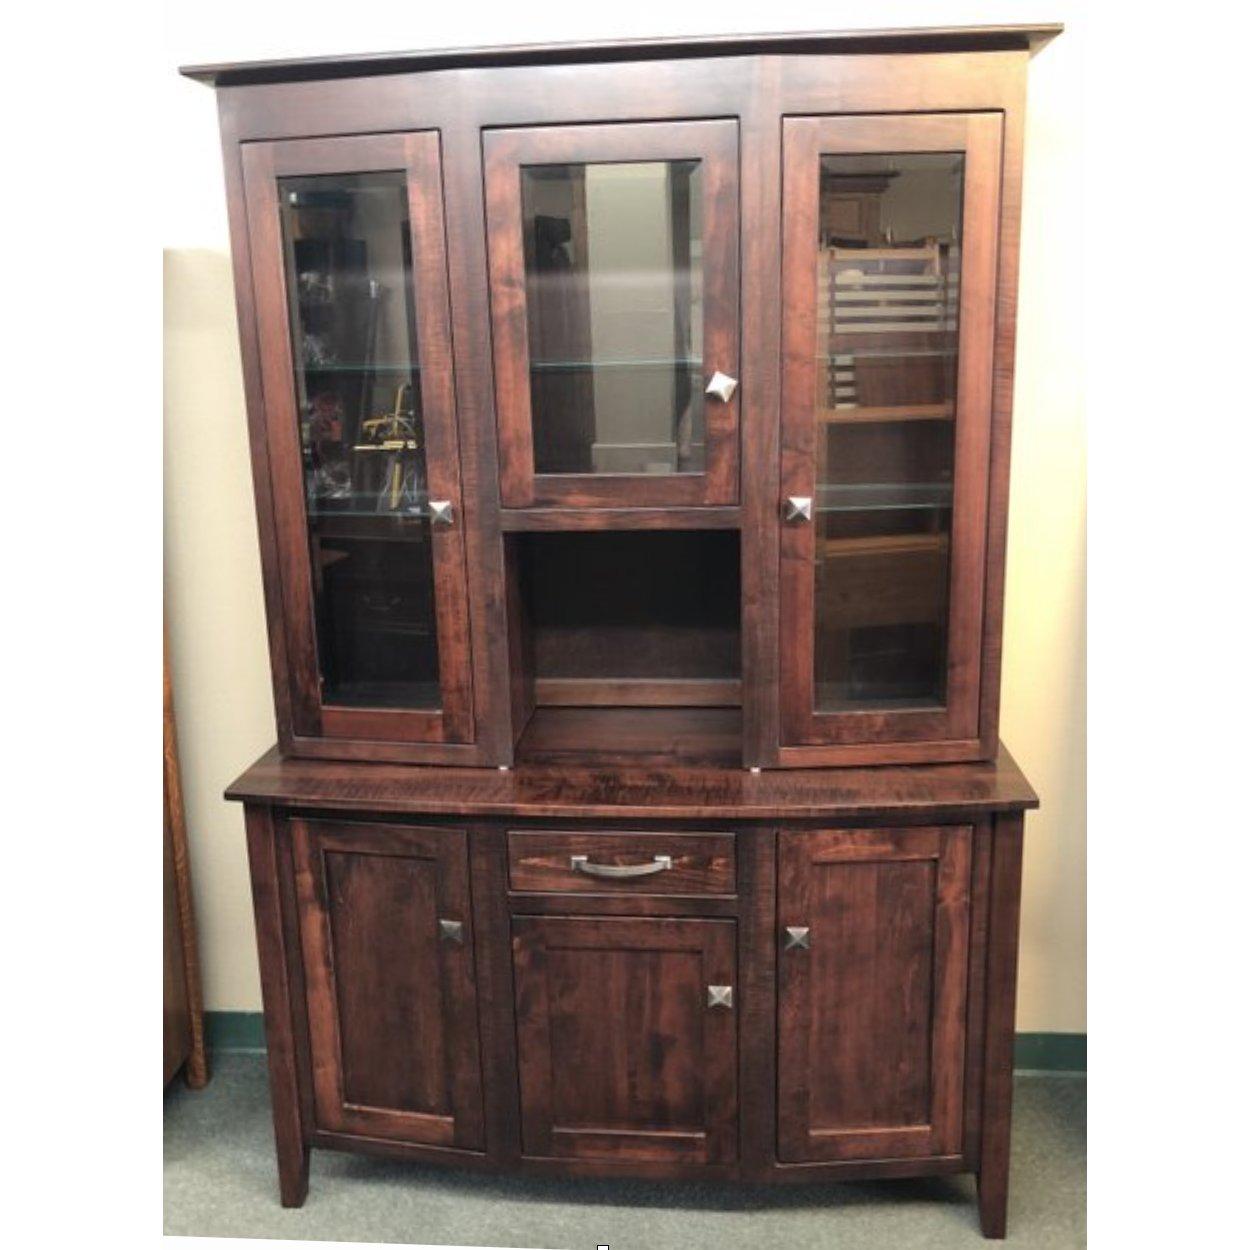 A richway three-door buffet & hutch by Townline Furniture. Straight from a designer showroom. The wood is Maple in a dark finish. The doors are soft closing with beveled glass. A total of five adjustable glass interior shelves. Three overhead three